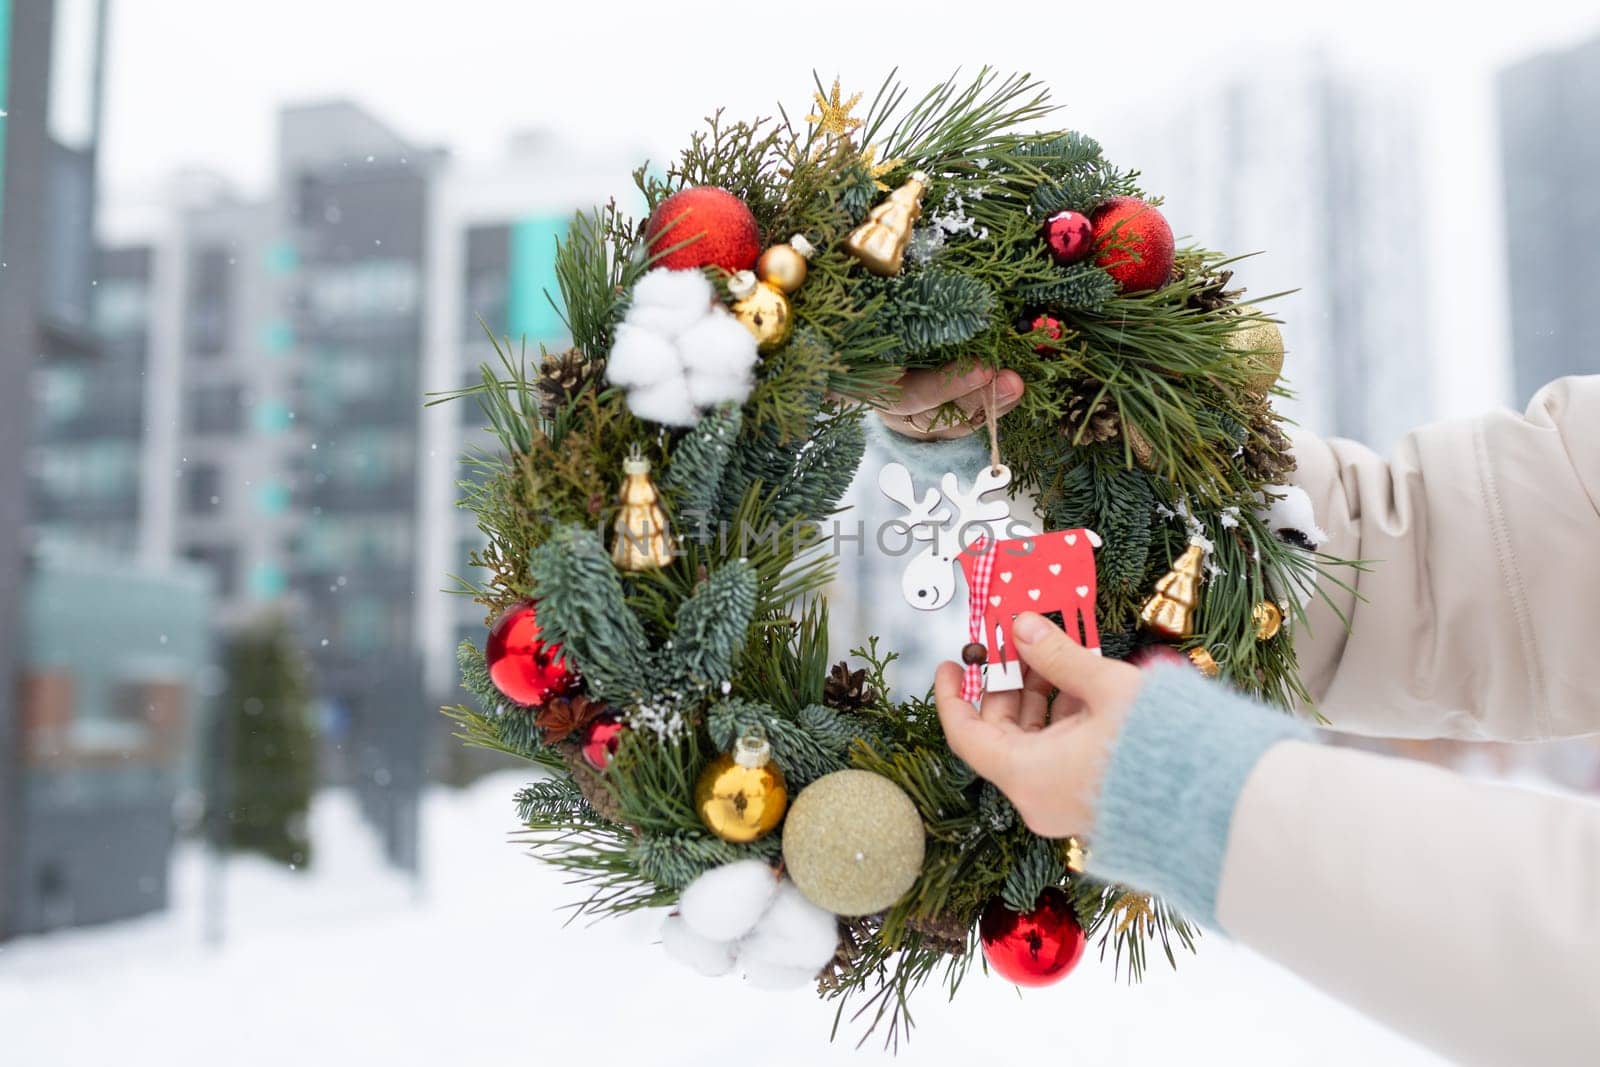 A person is holding a festive Christmas wreath adorned with colorful decorations. The wreath features ornaments, ribbons, and twinkling lights, creating a holiday atmosphere.